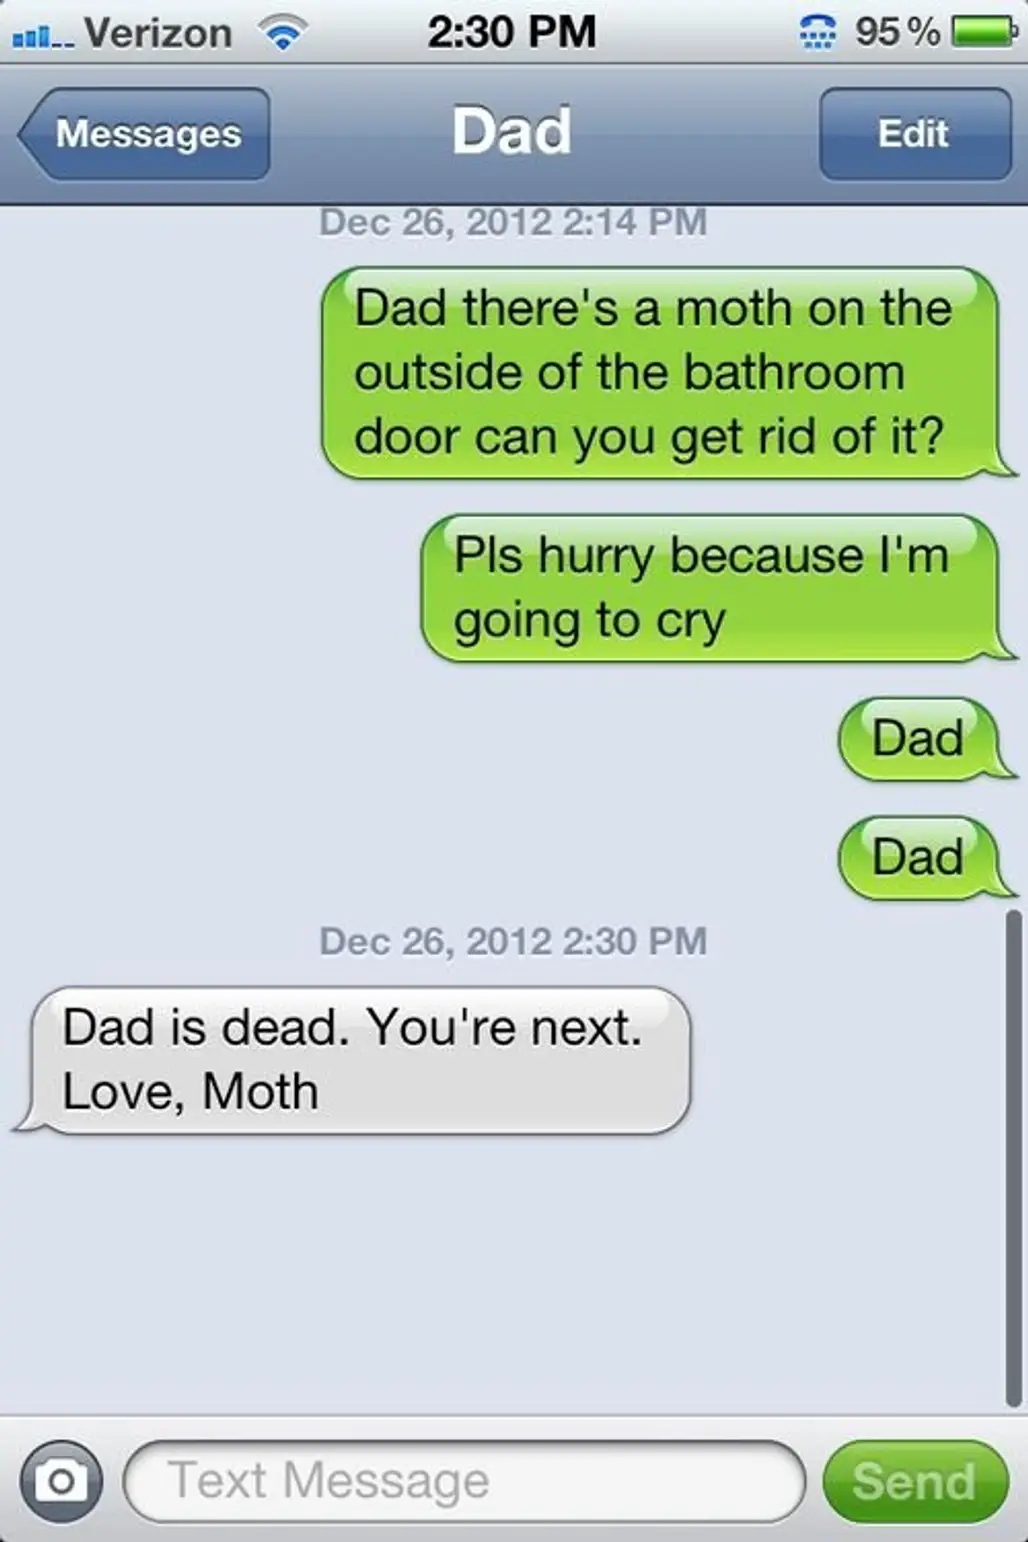 And Now I'm Afraid of Moths